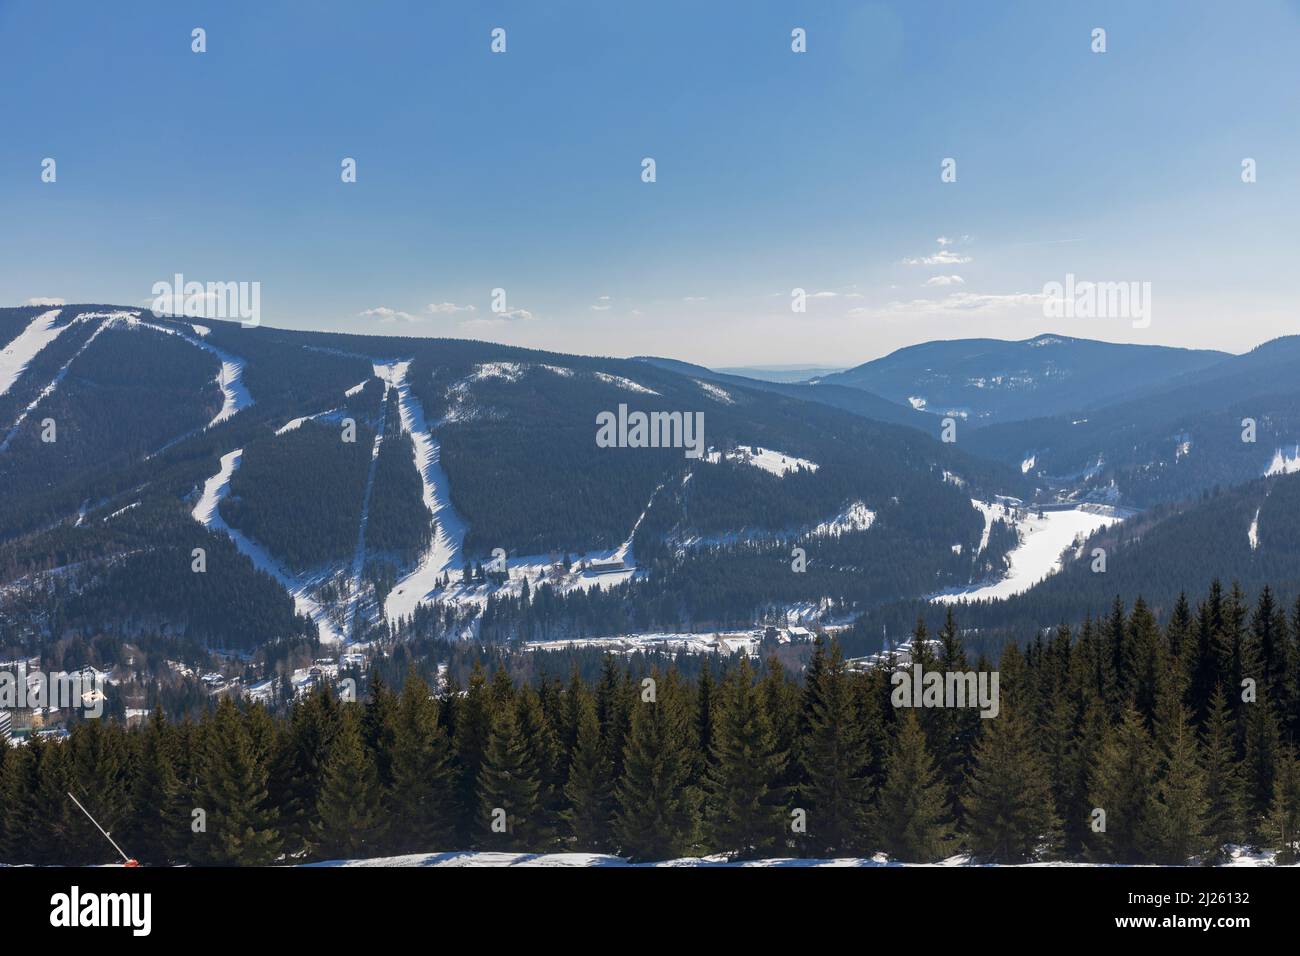 View of the ski resort Spindleruv Mlyn in mountain Krkonose from the top of Medvedin hill. Winter ski resort Spindleruv mlyn, slopes Plane and Hromovk Stock Photo